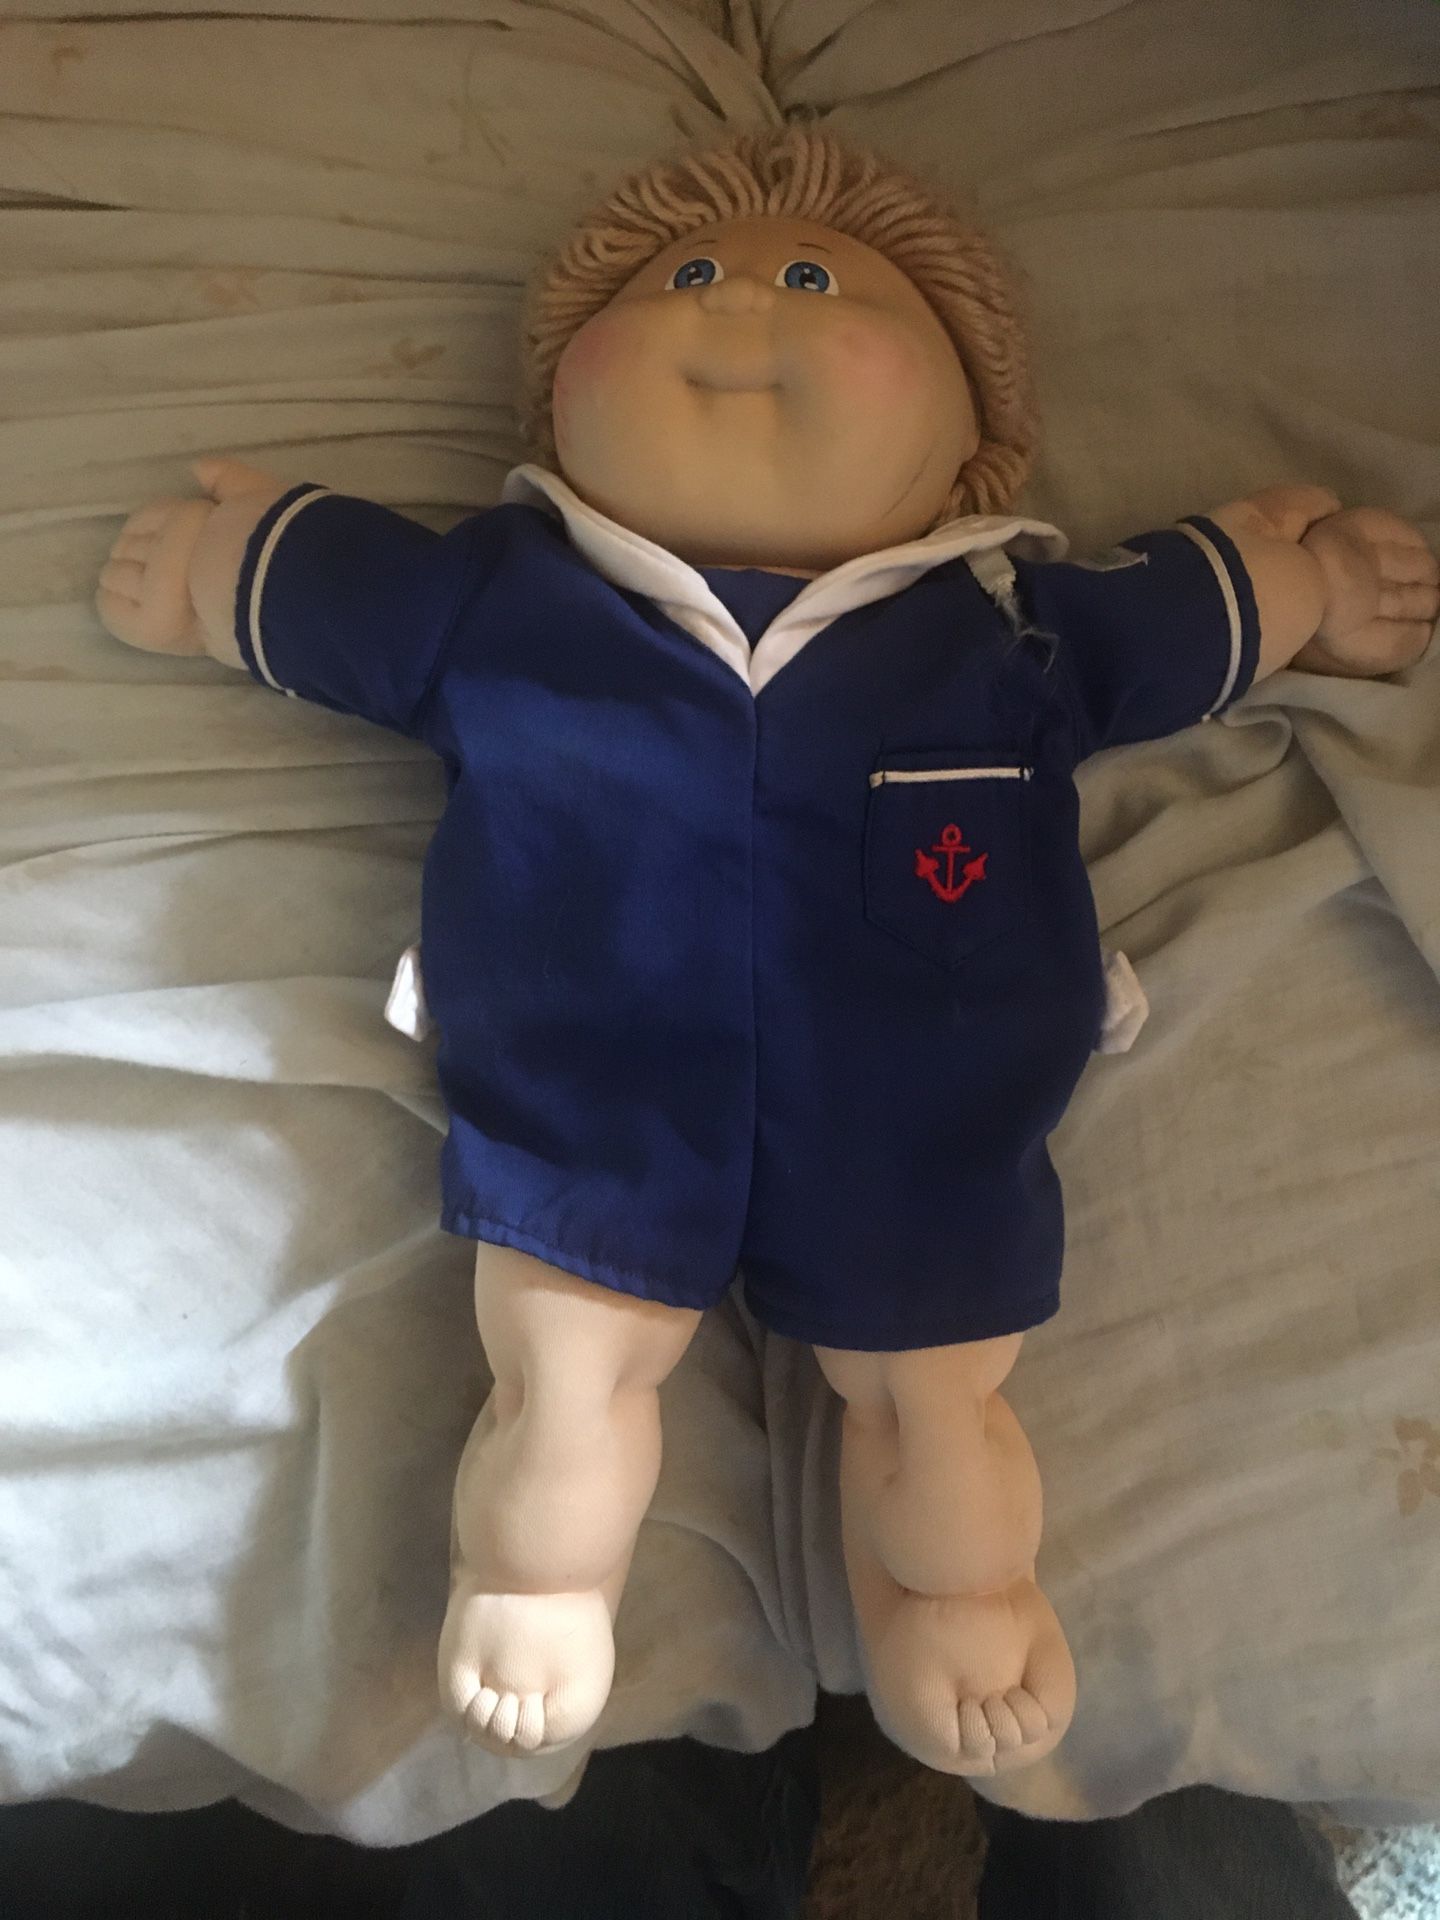 1982 Cabbage Patch Doll On $40 Firm